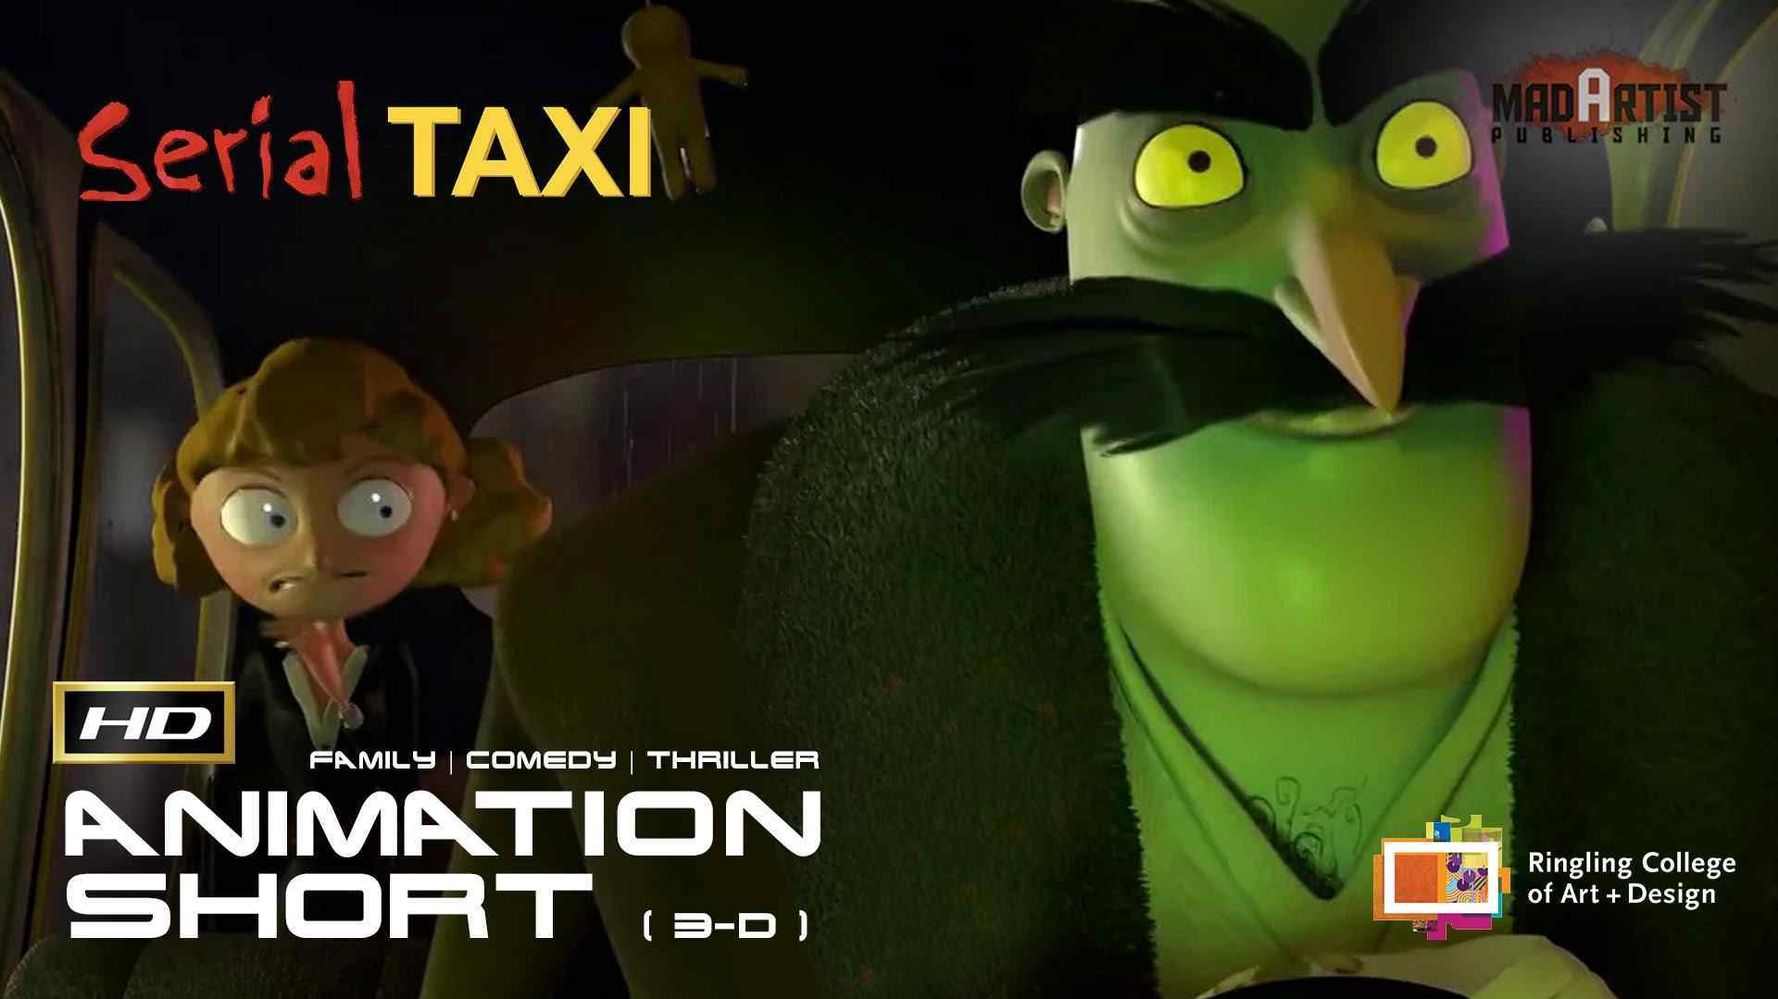 SERIAL TAXI - A Funny Serial Killer Story... Award Winning CGI 3D Animated  Film By Paolo Cogliati | HuffPost Contributor